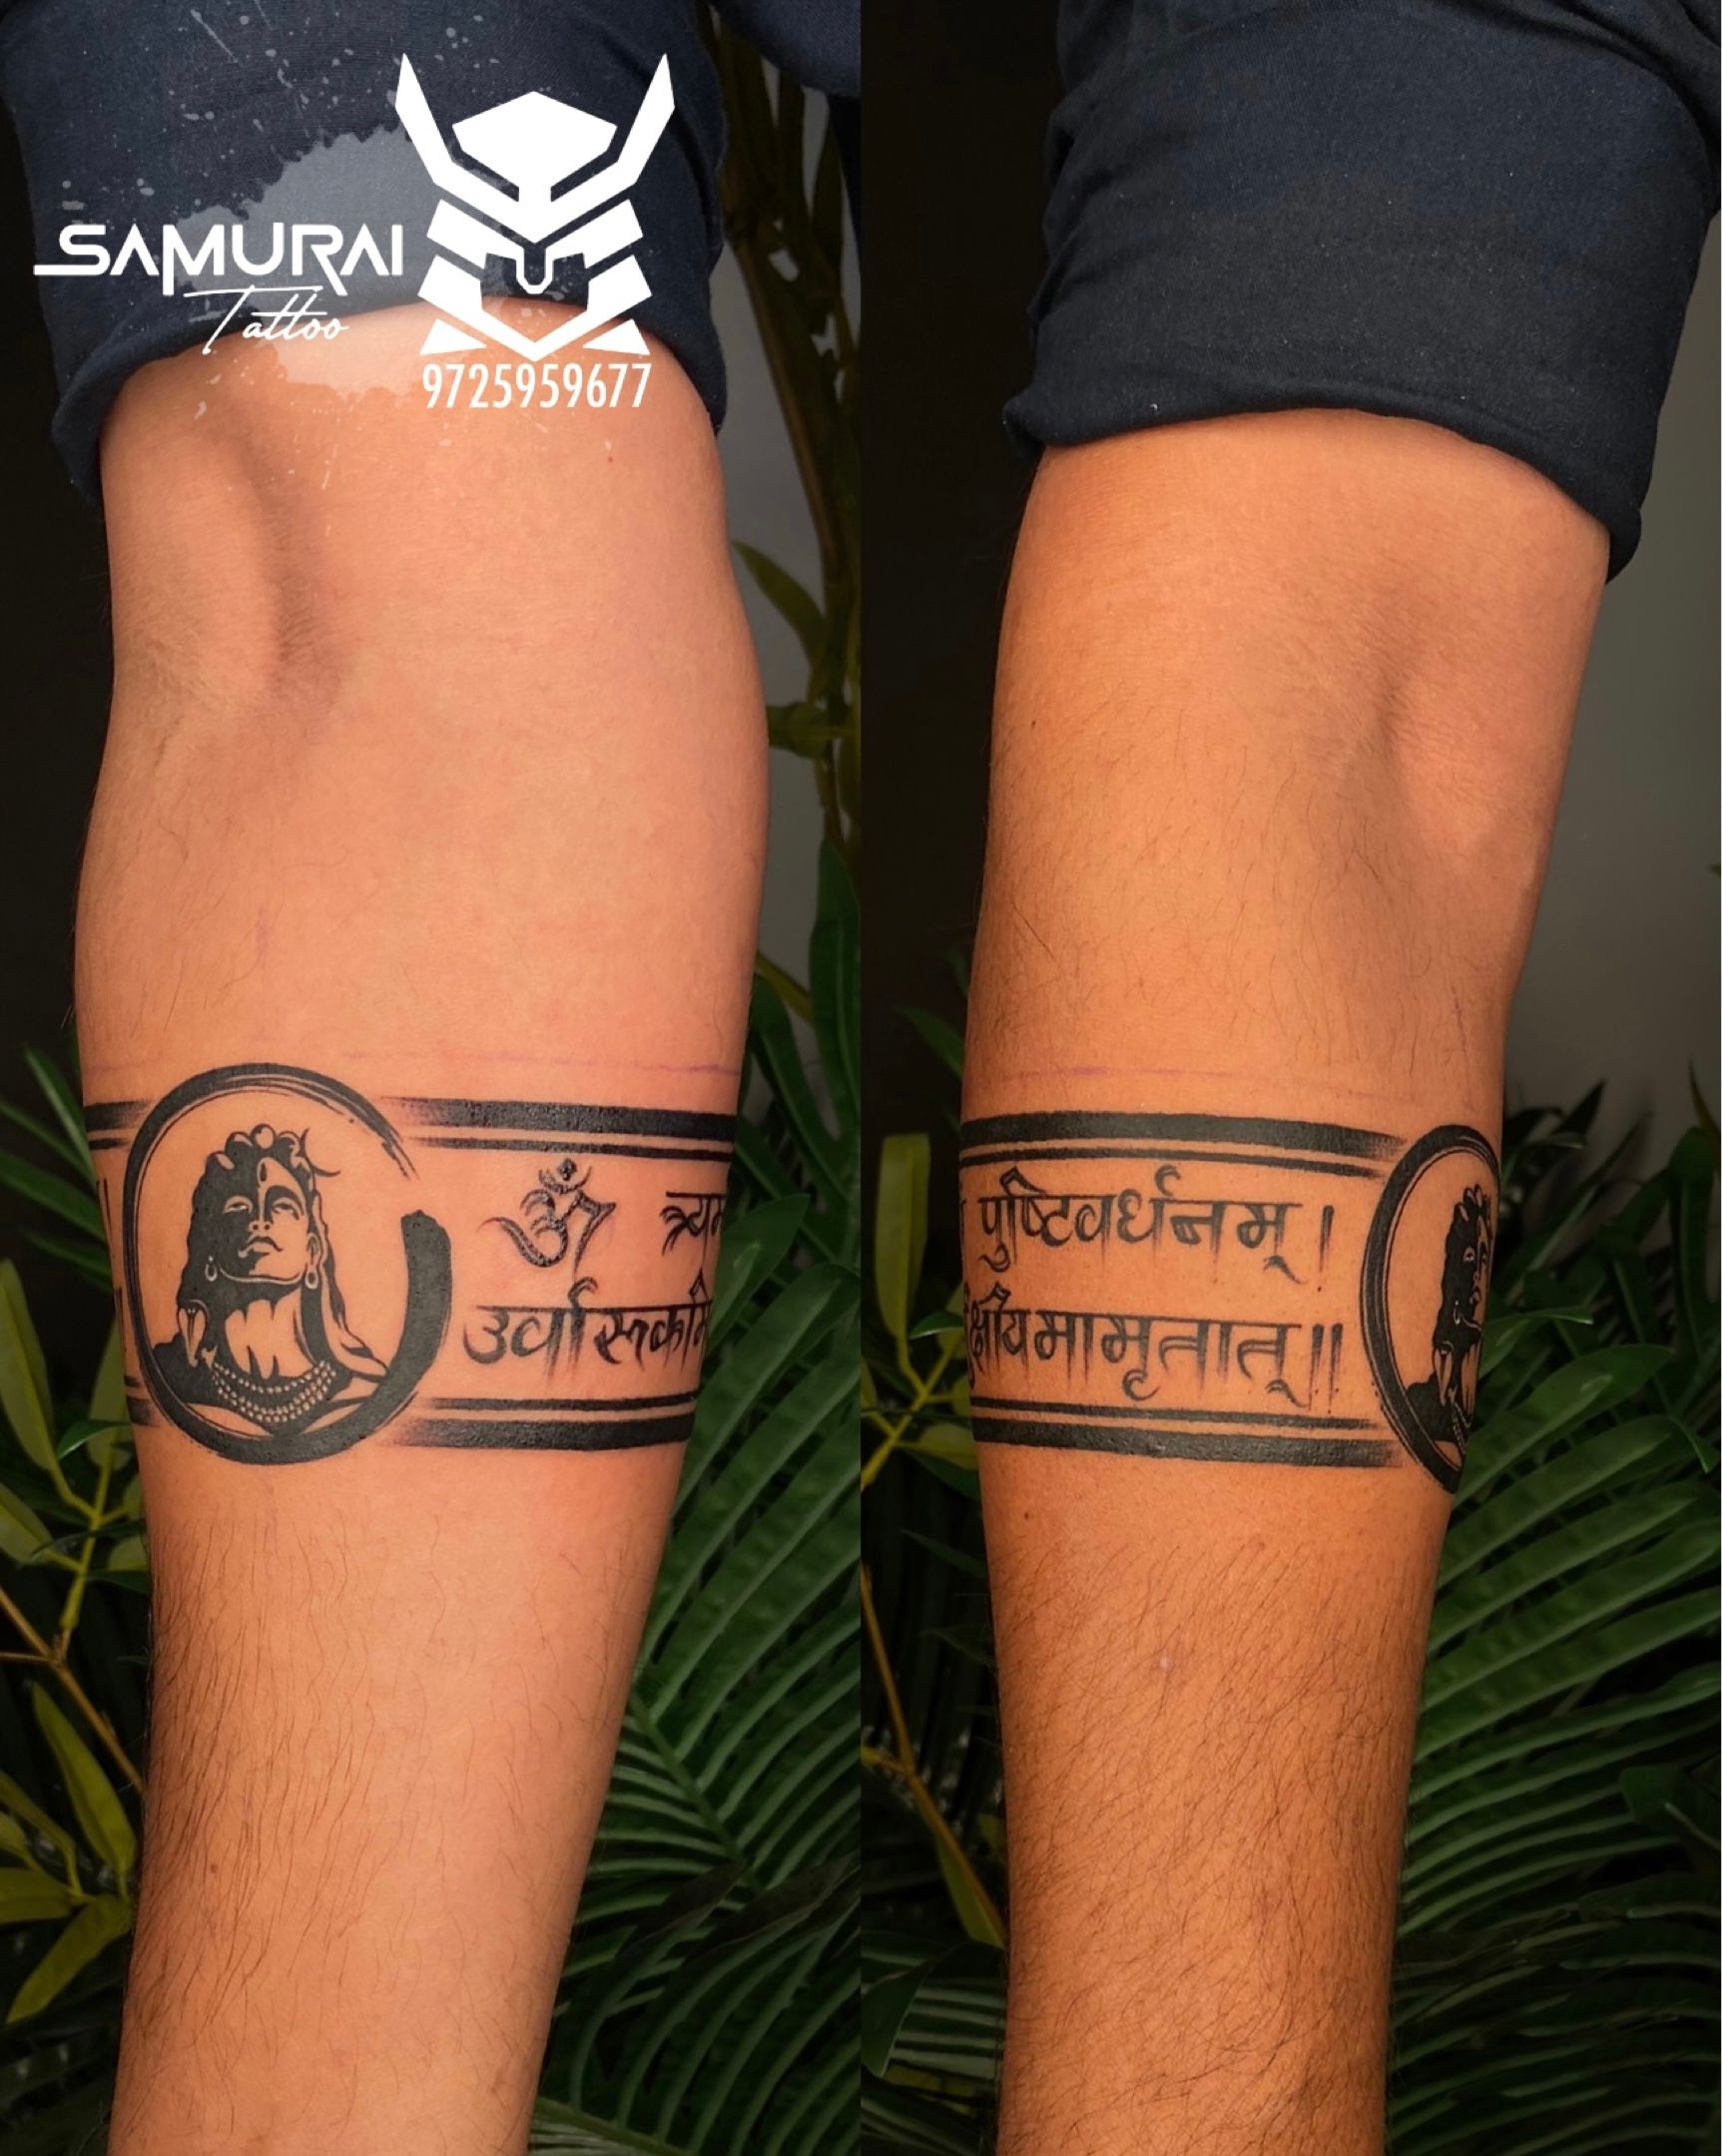 Tattooist Annu Rathore on Twitter Arm Band Tattoo With MaaampPaa  Design Tattoo by Artist Annu Rathore The First Female Tattoo Artist Of  Central India Madhya Pradesh Indore Title Award Winner  httpstco5IQRGe4gns 